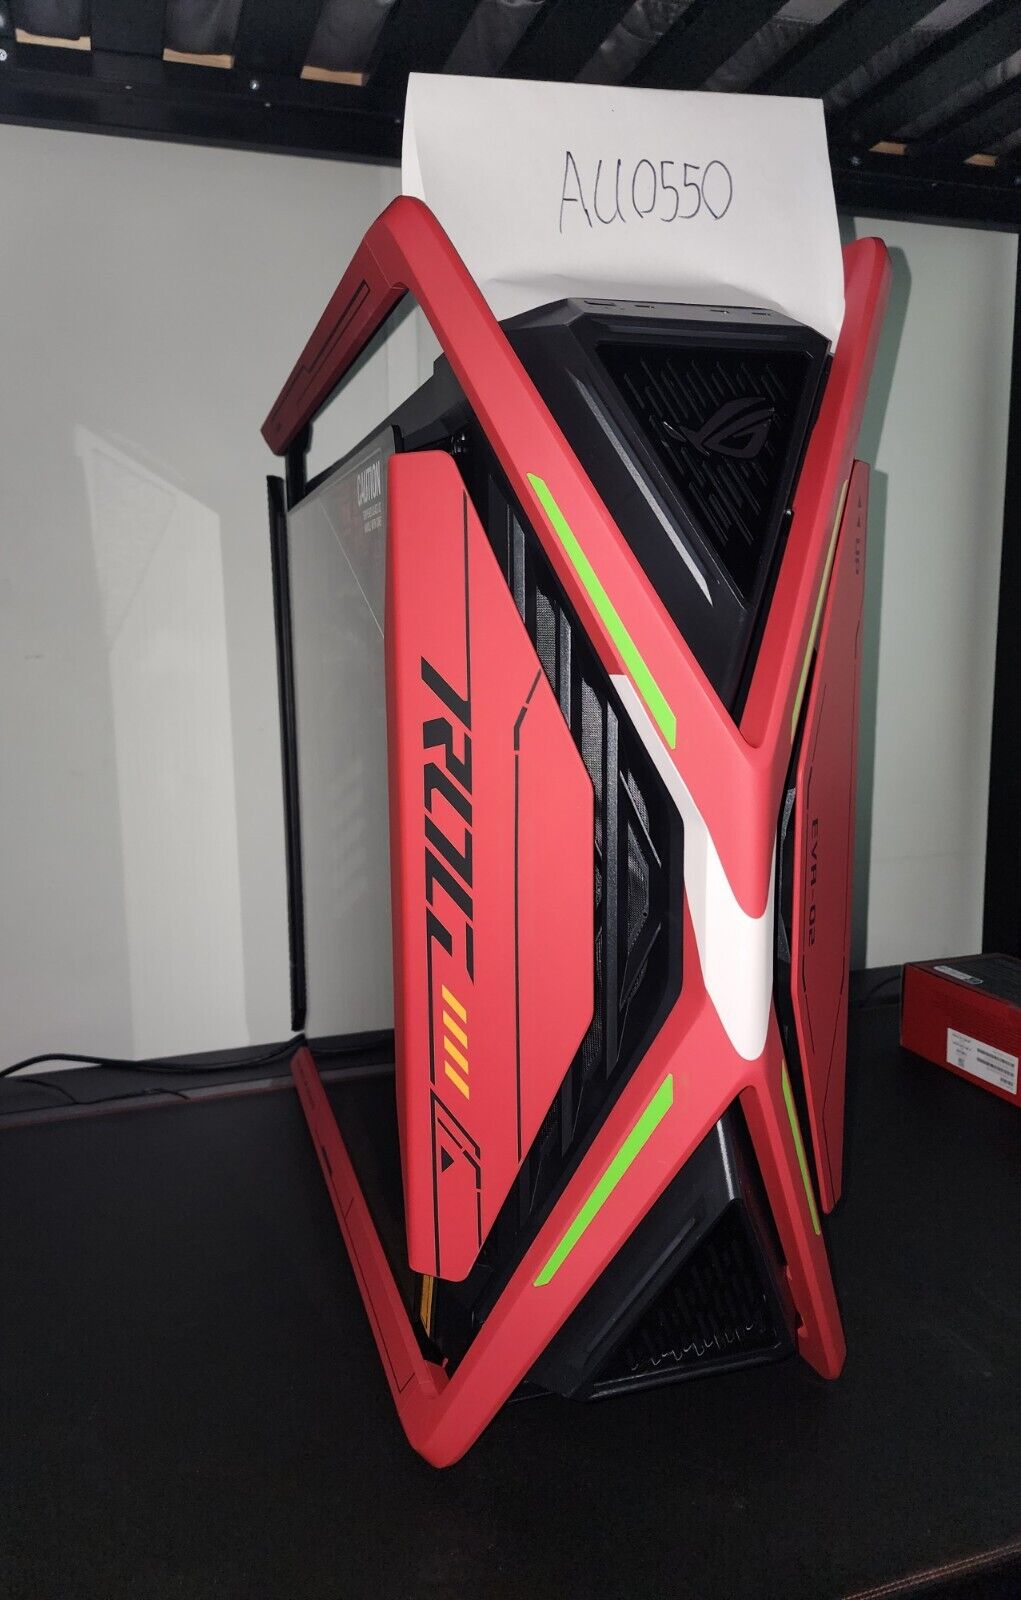 ASUS ROG Case Hyperion EVA-02, LIMITED EDITION